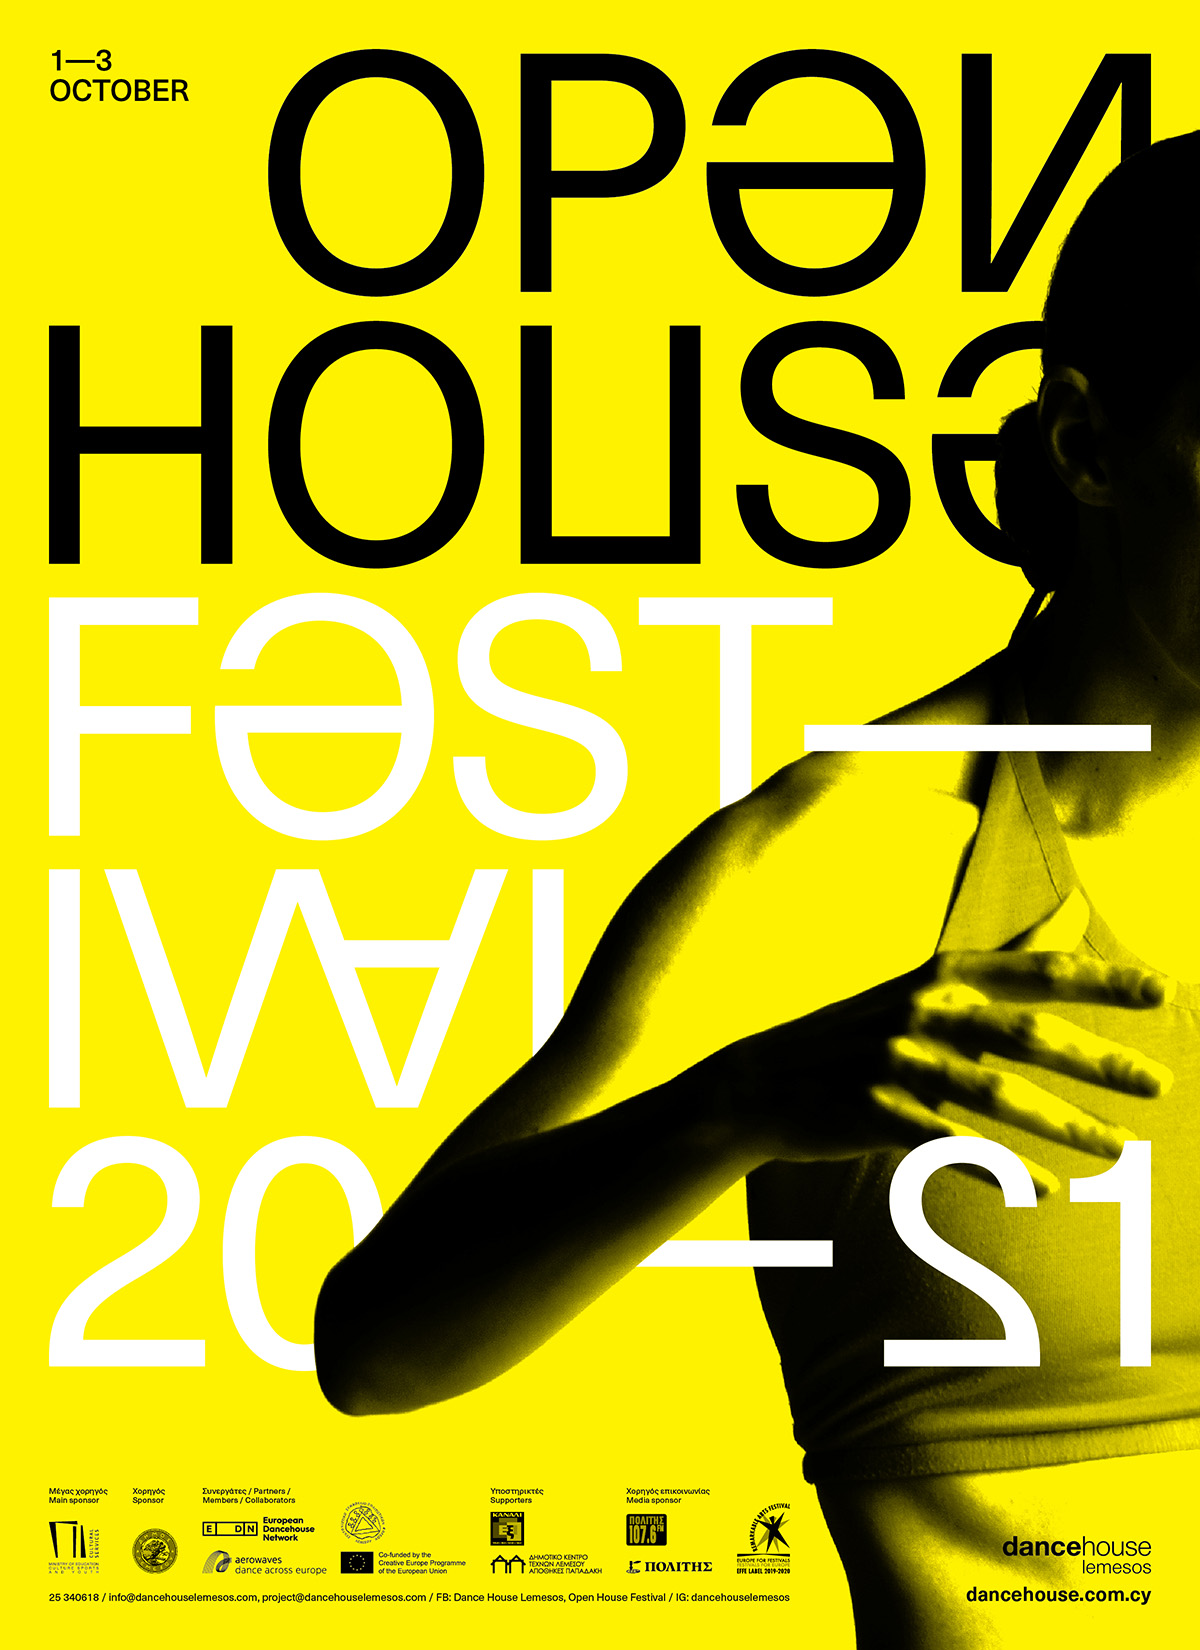 12th INTERNATIONAL OPEN HOUSE FESTIVAL - CONTEMPORARY DANCE AND PERFORMANCE